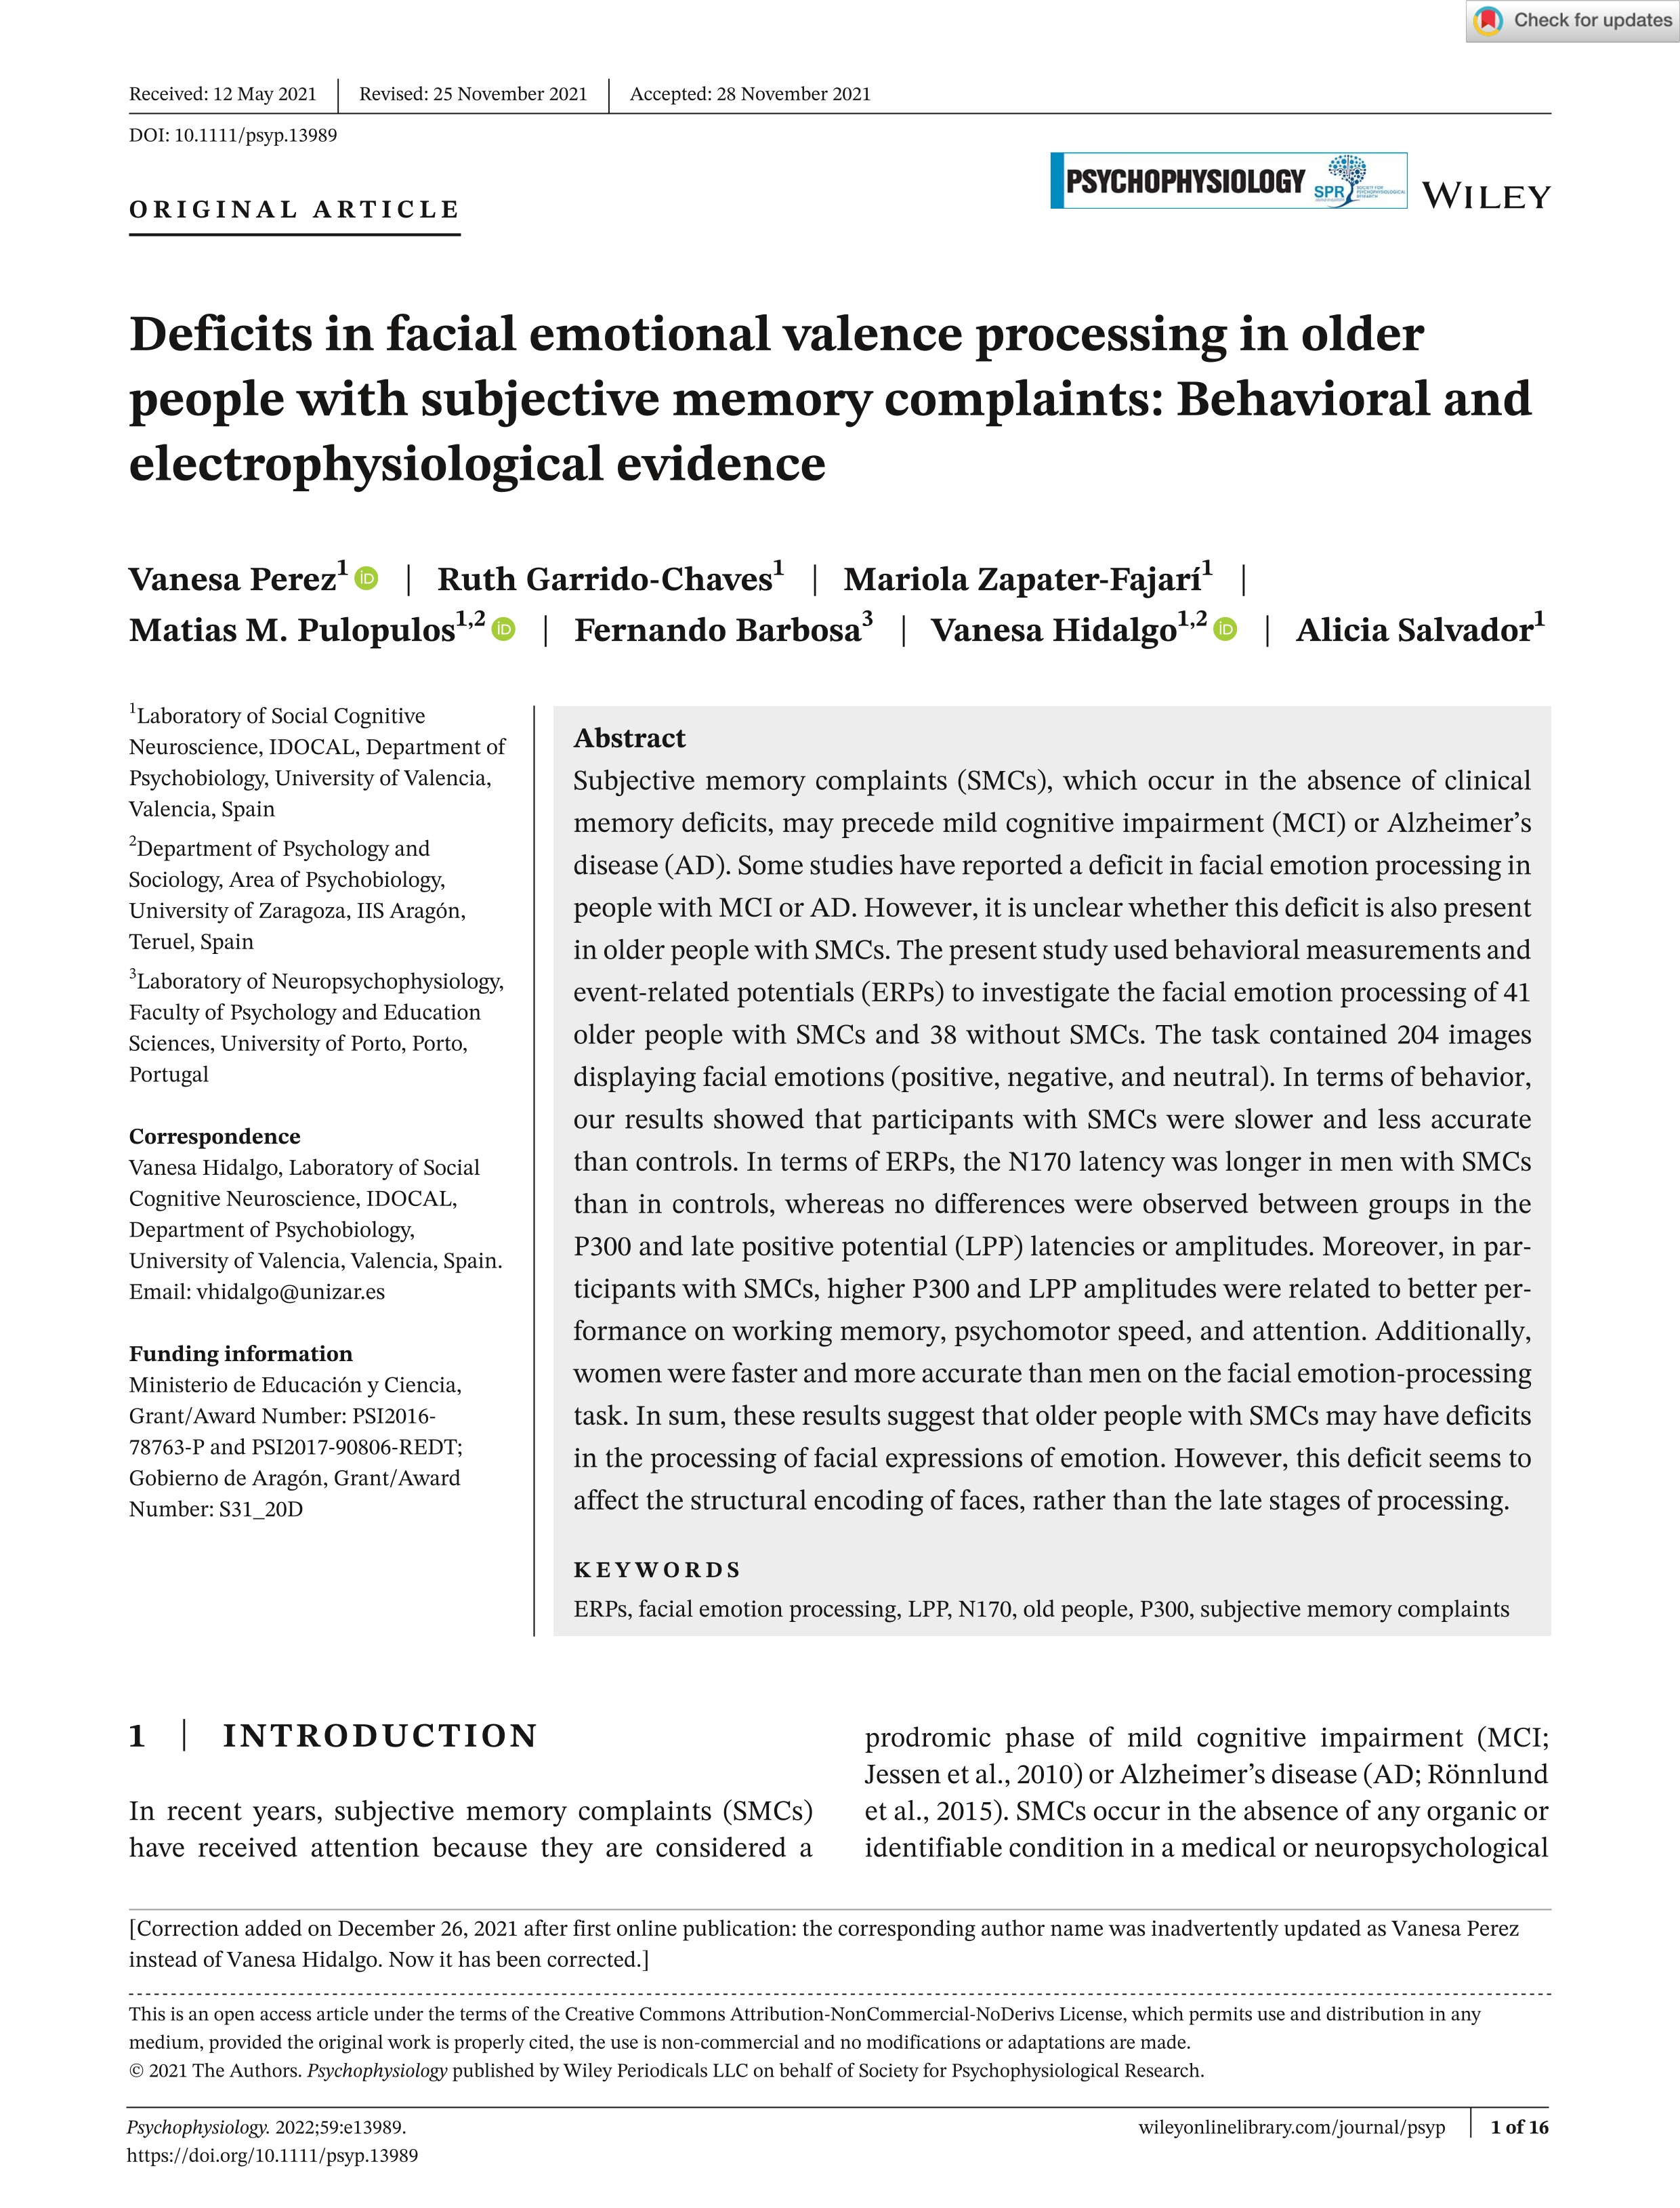 Deficits in facial emotional valence processing in older people with subjective memory complaints: Behavioral and electrophysiological evidence